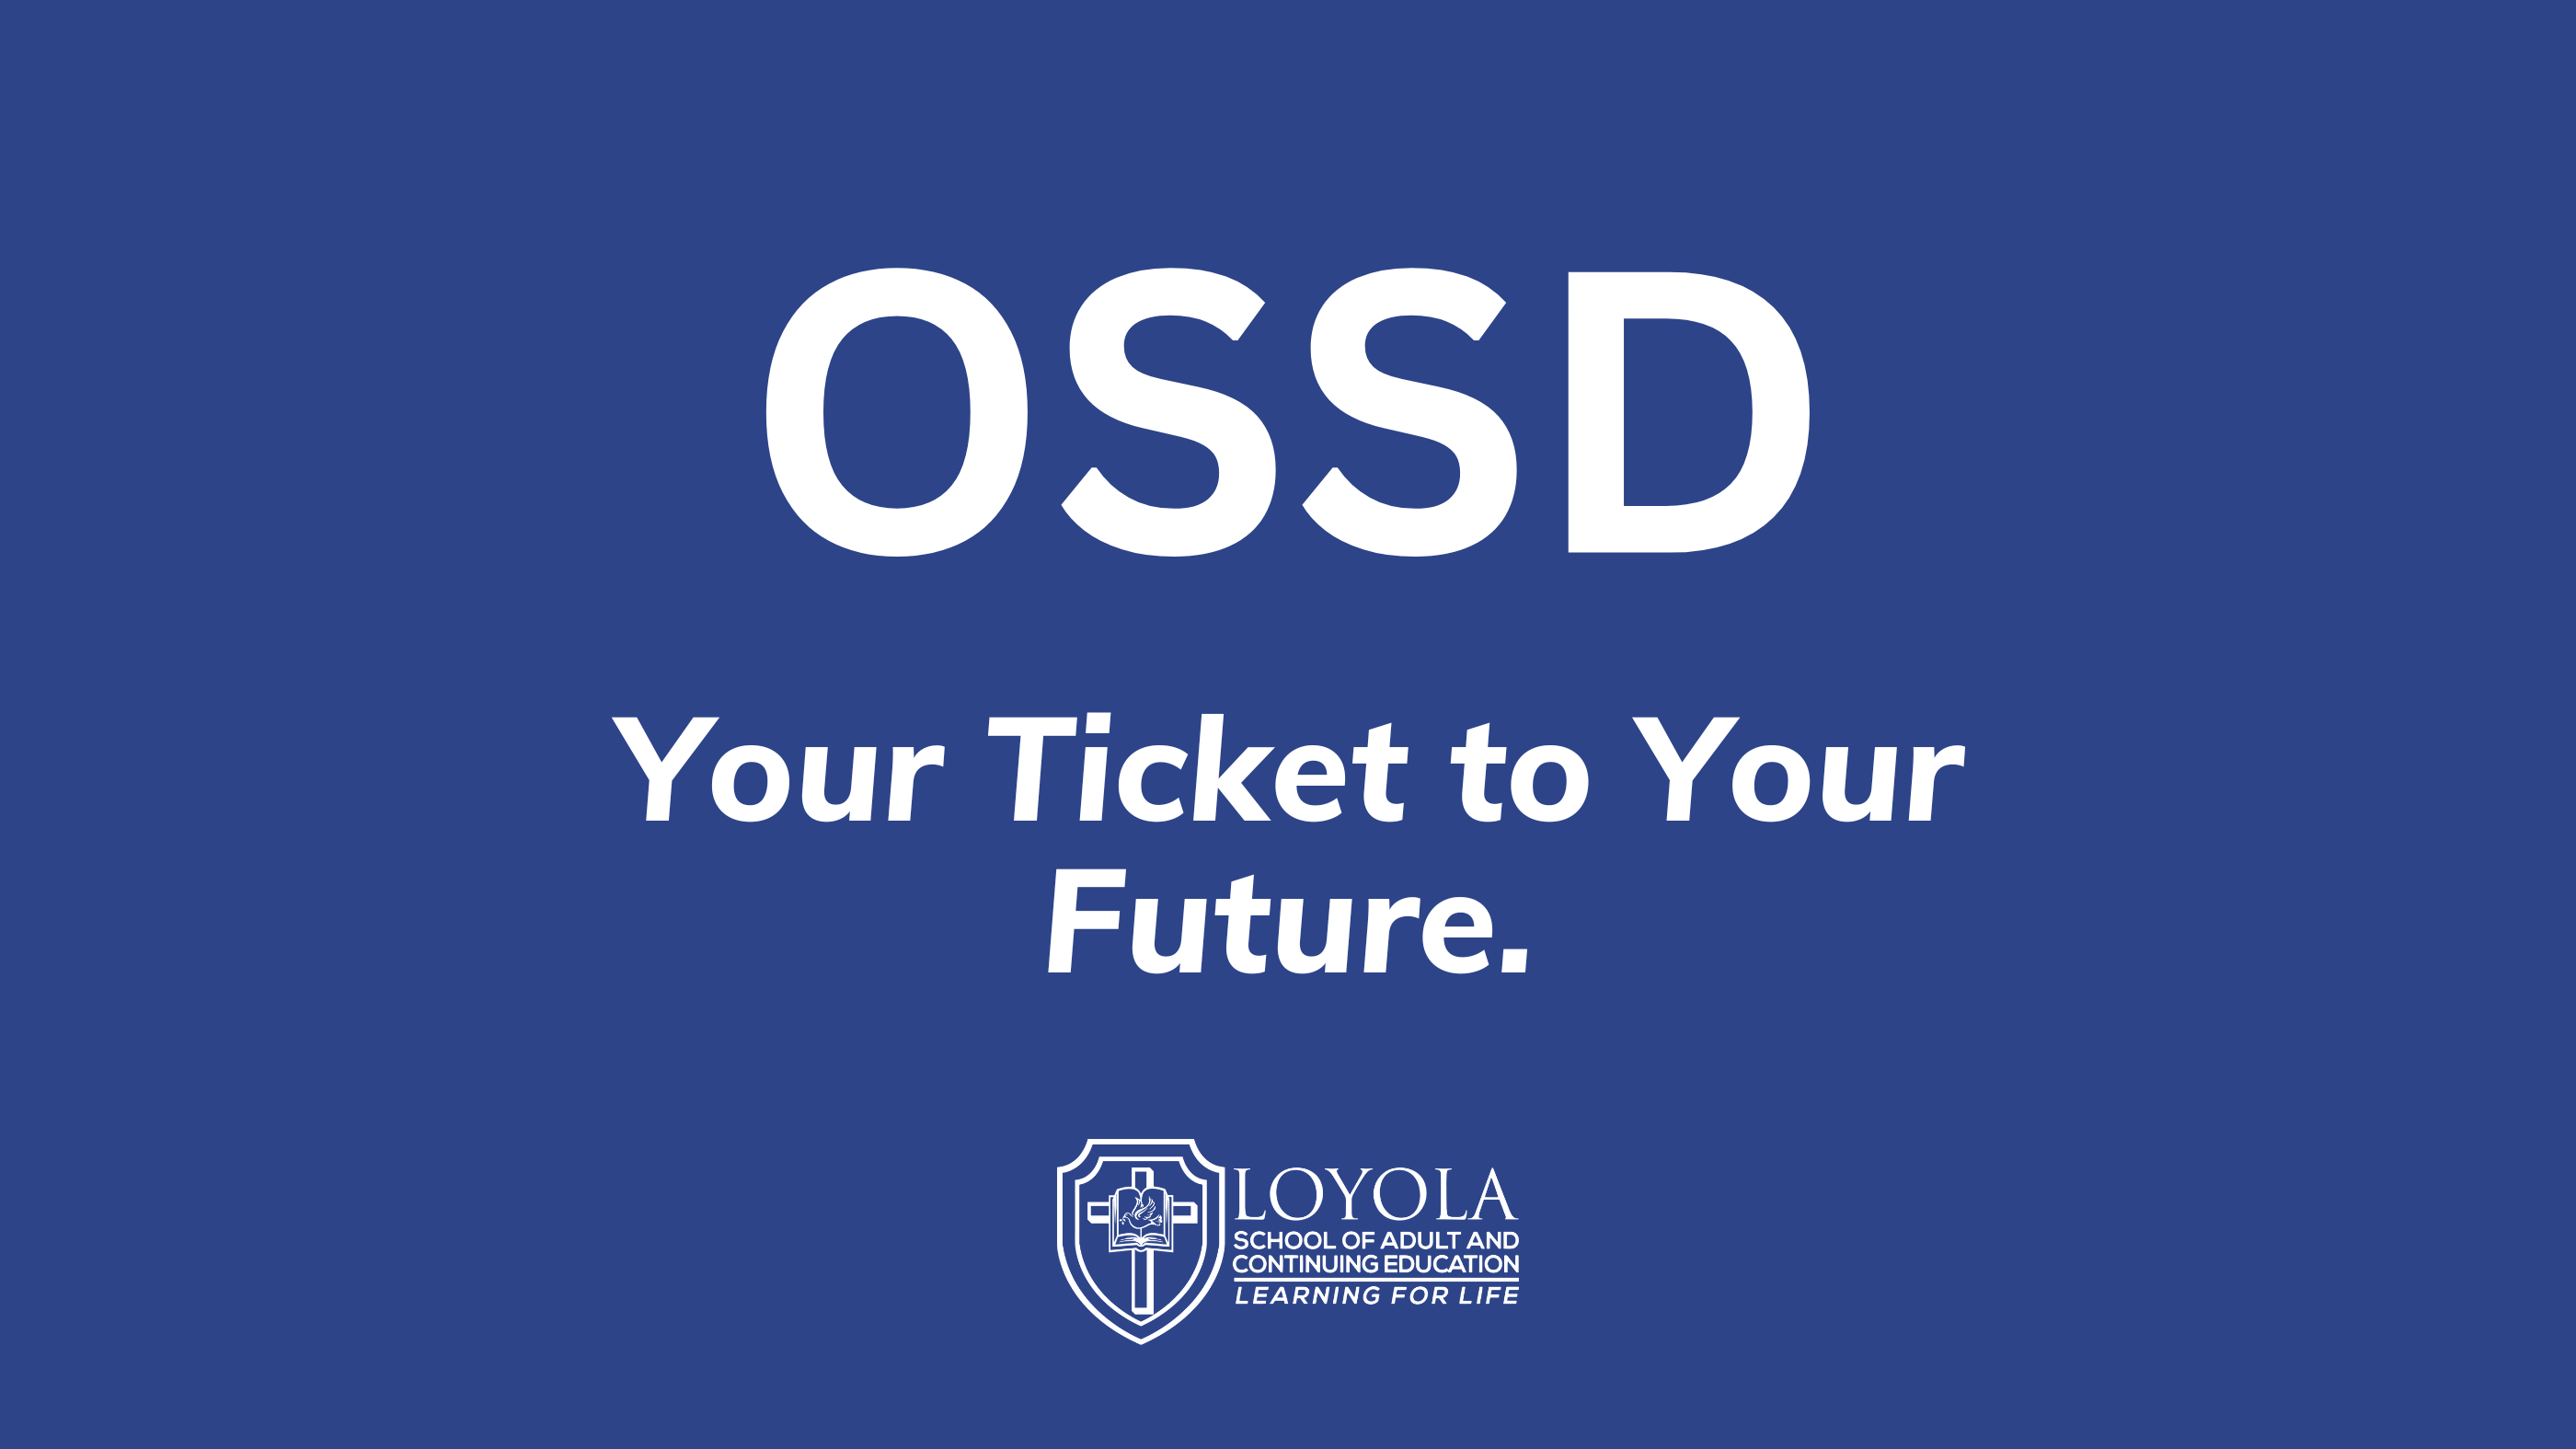 White text over blue background "OSSD Your Ticket to Your Future." with Loyola logo